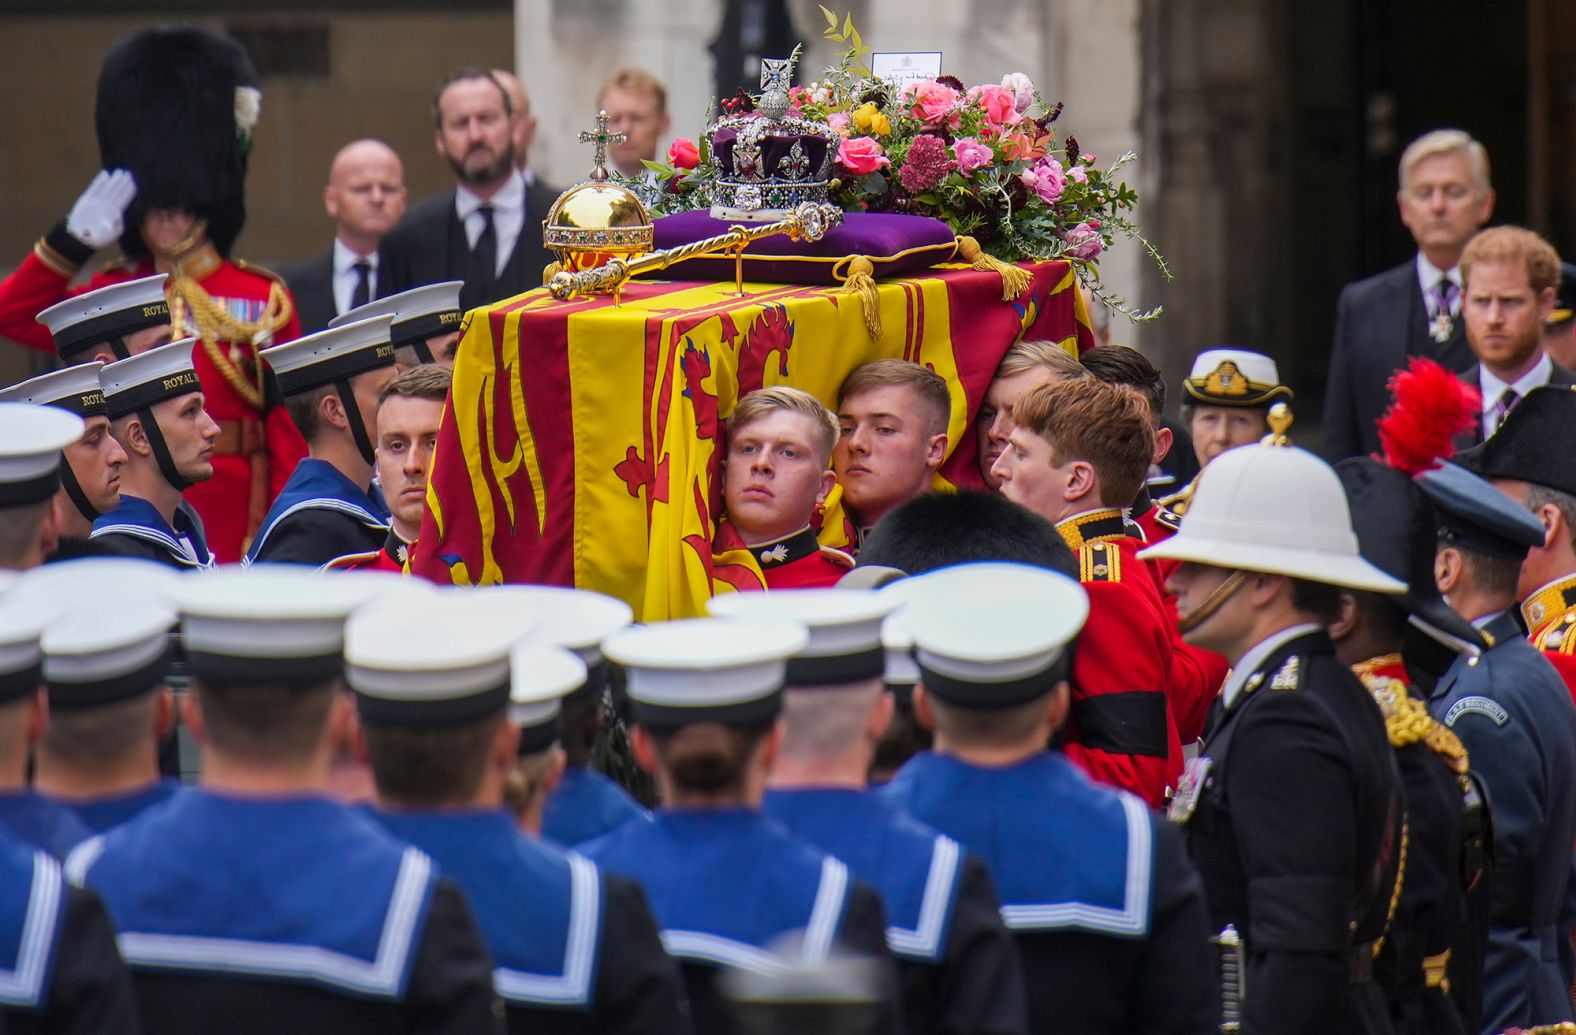 The coffin is carried into Westminster Abbey after a short procession from Westminster Hall, where the Queen was lying in state. The coffin was draped with the Royal Standard, and the Instruments of State -- the Imperial State Crown and regalia -- <a href="index.php?page=&url=https%3A%2F%2Fwww.cnn.com%2Fuk%2Flive-news%2Ffuneral-queen-elizabeth-intl-gbr%2Fh_62df63a1713d7b8828a217117d826d9c" target="_blank">were laid upon it</a> along with a flower wreath.